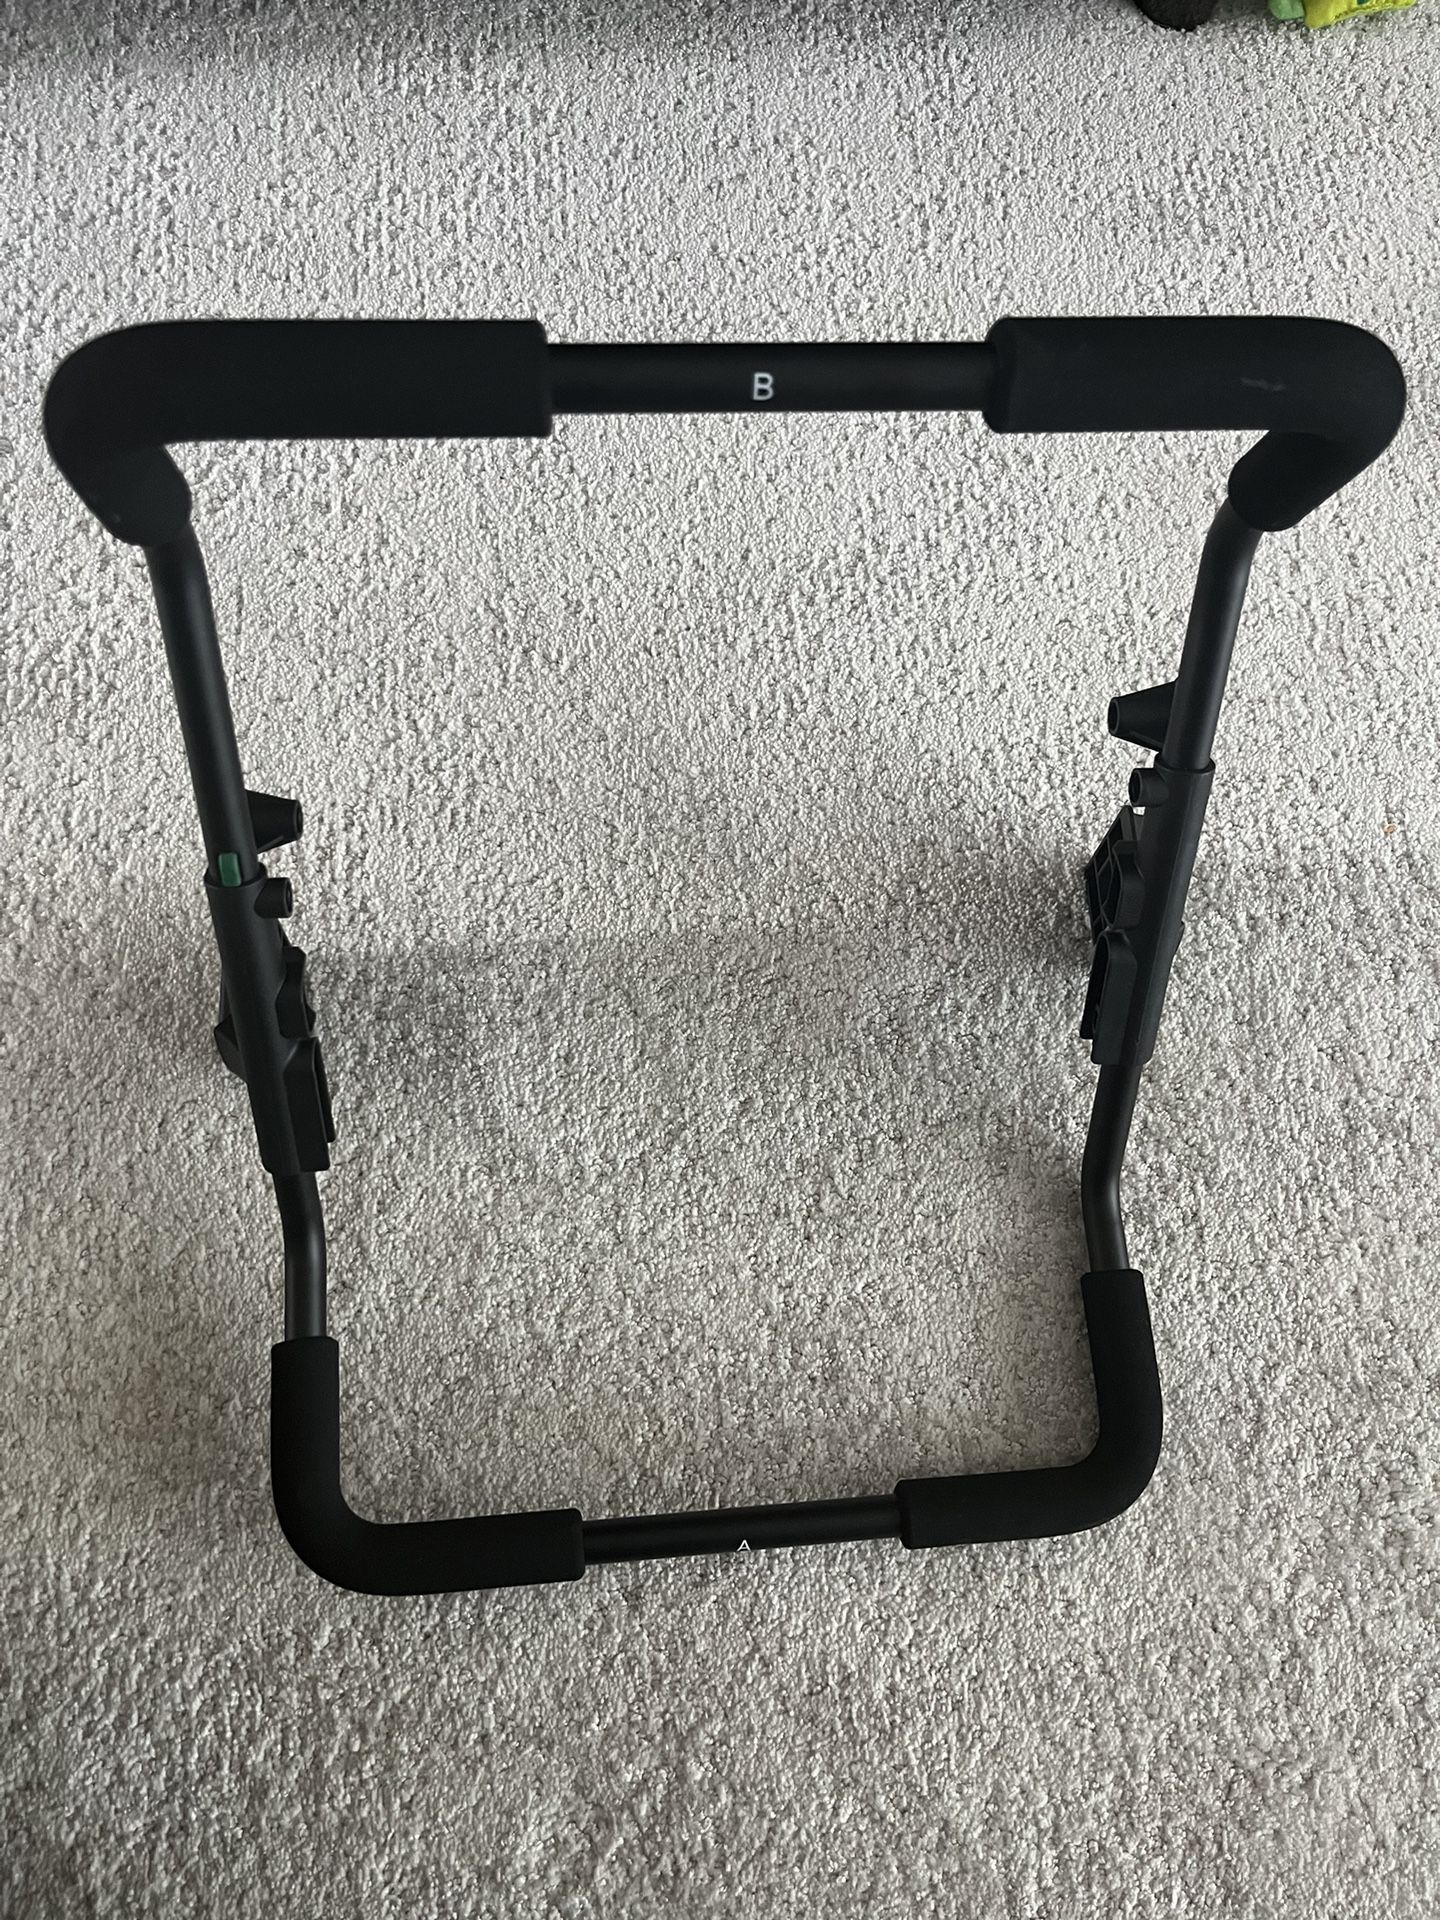 Baby Jogger Chicco/Peg Perego Car Seat Adapter